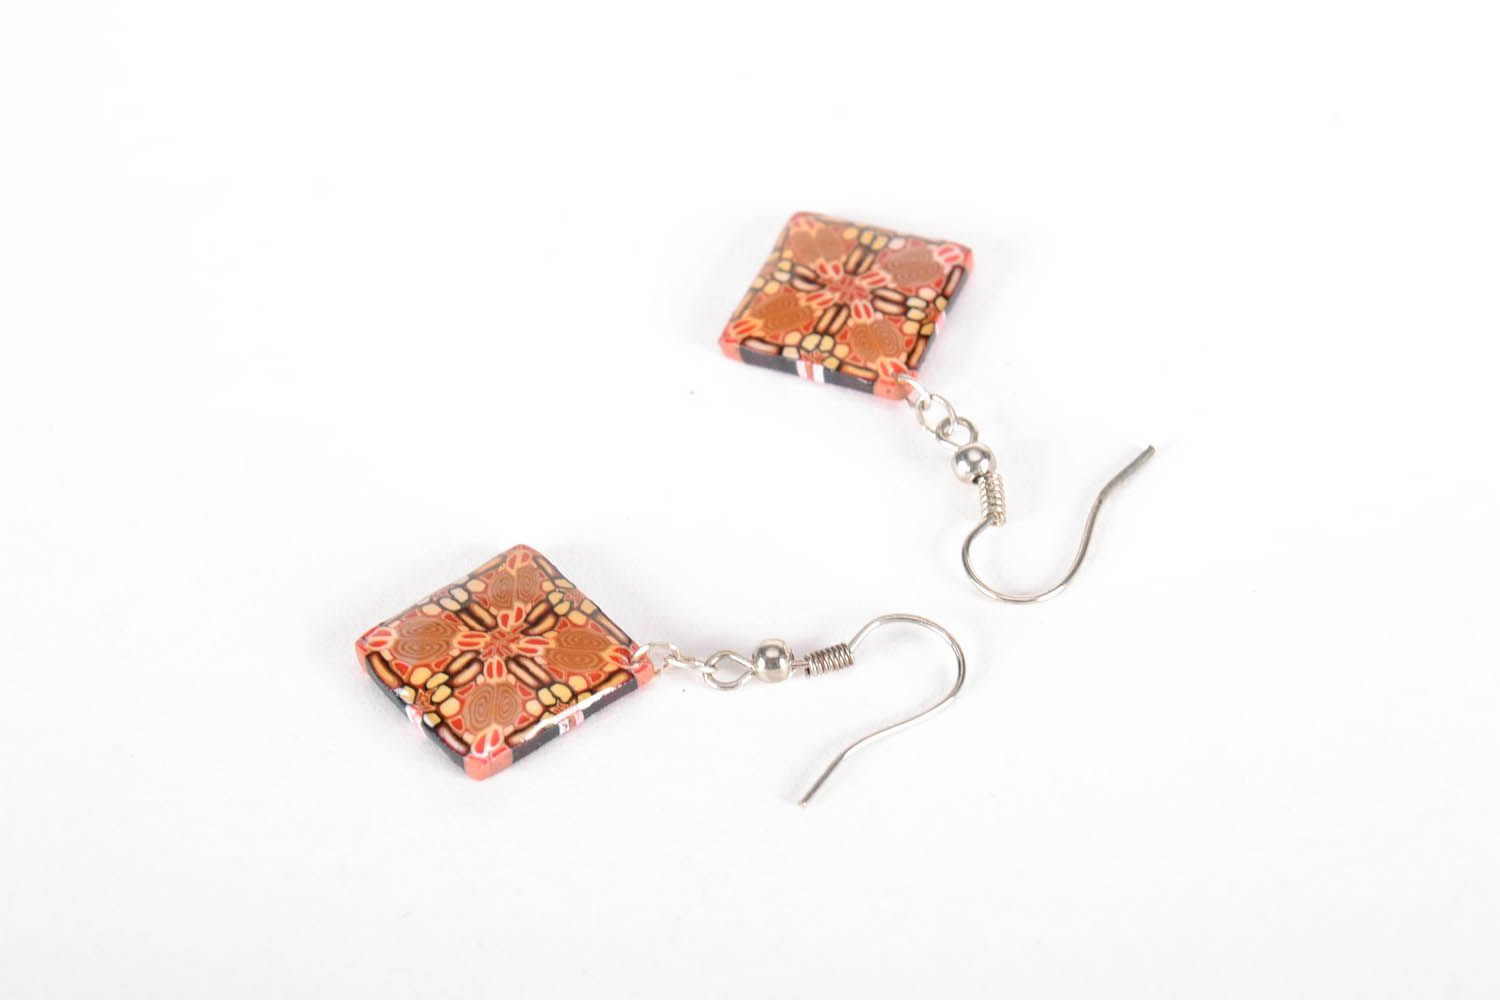 Earrings made of polymer clay photo 5